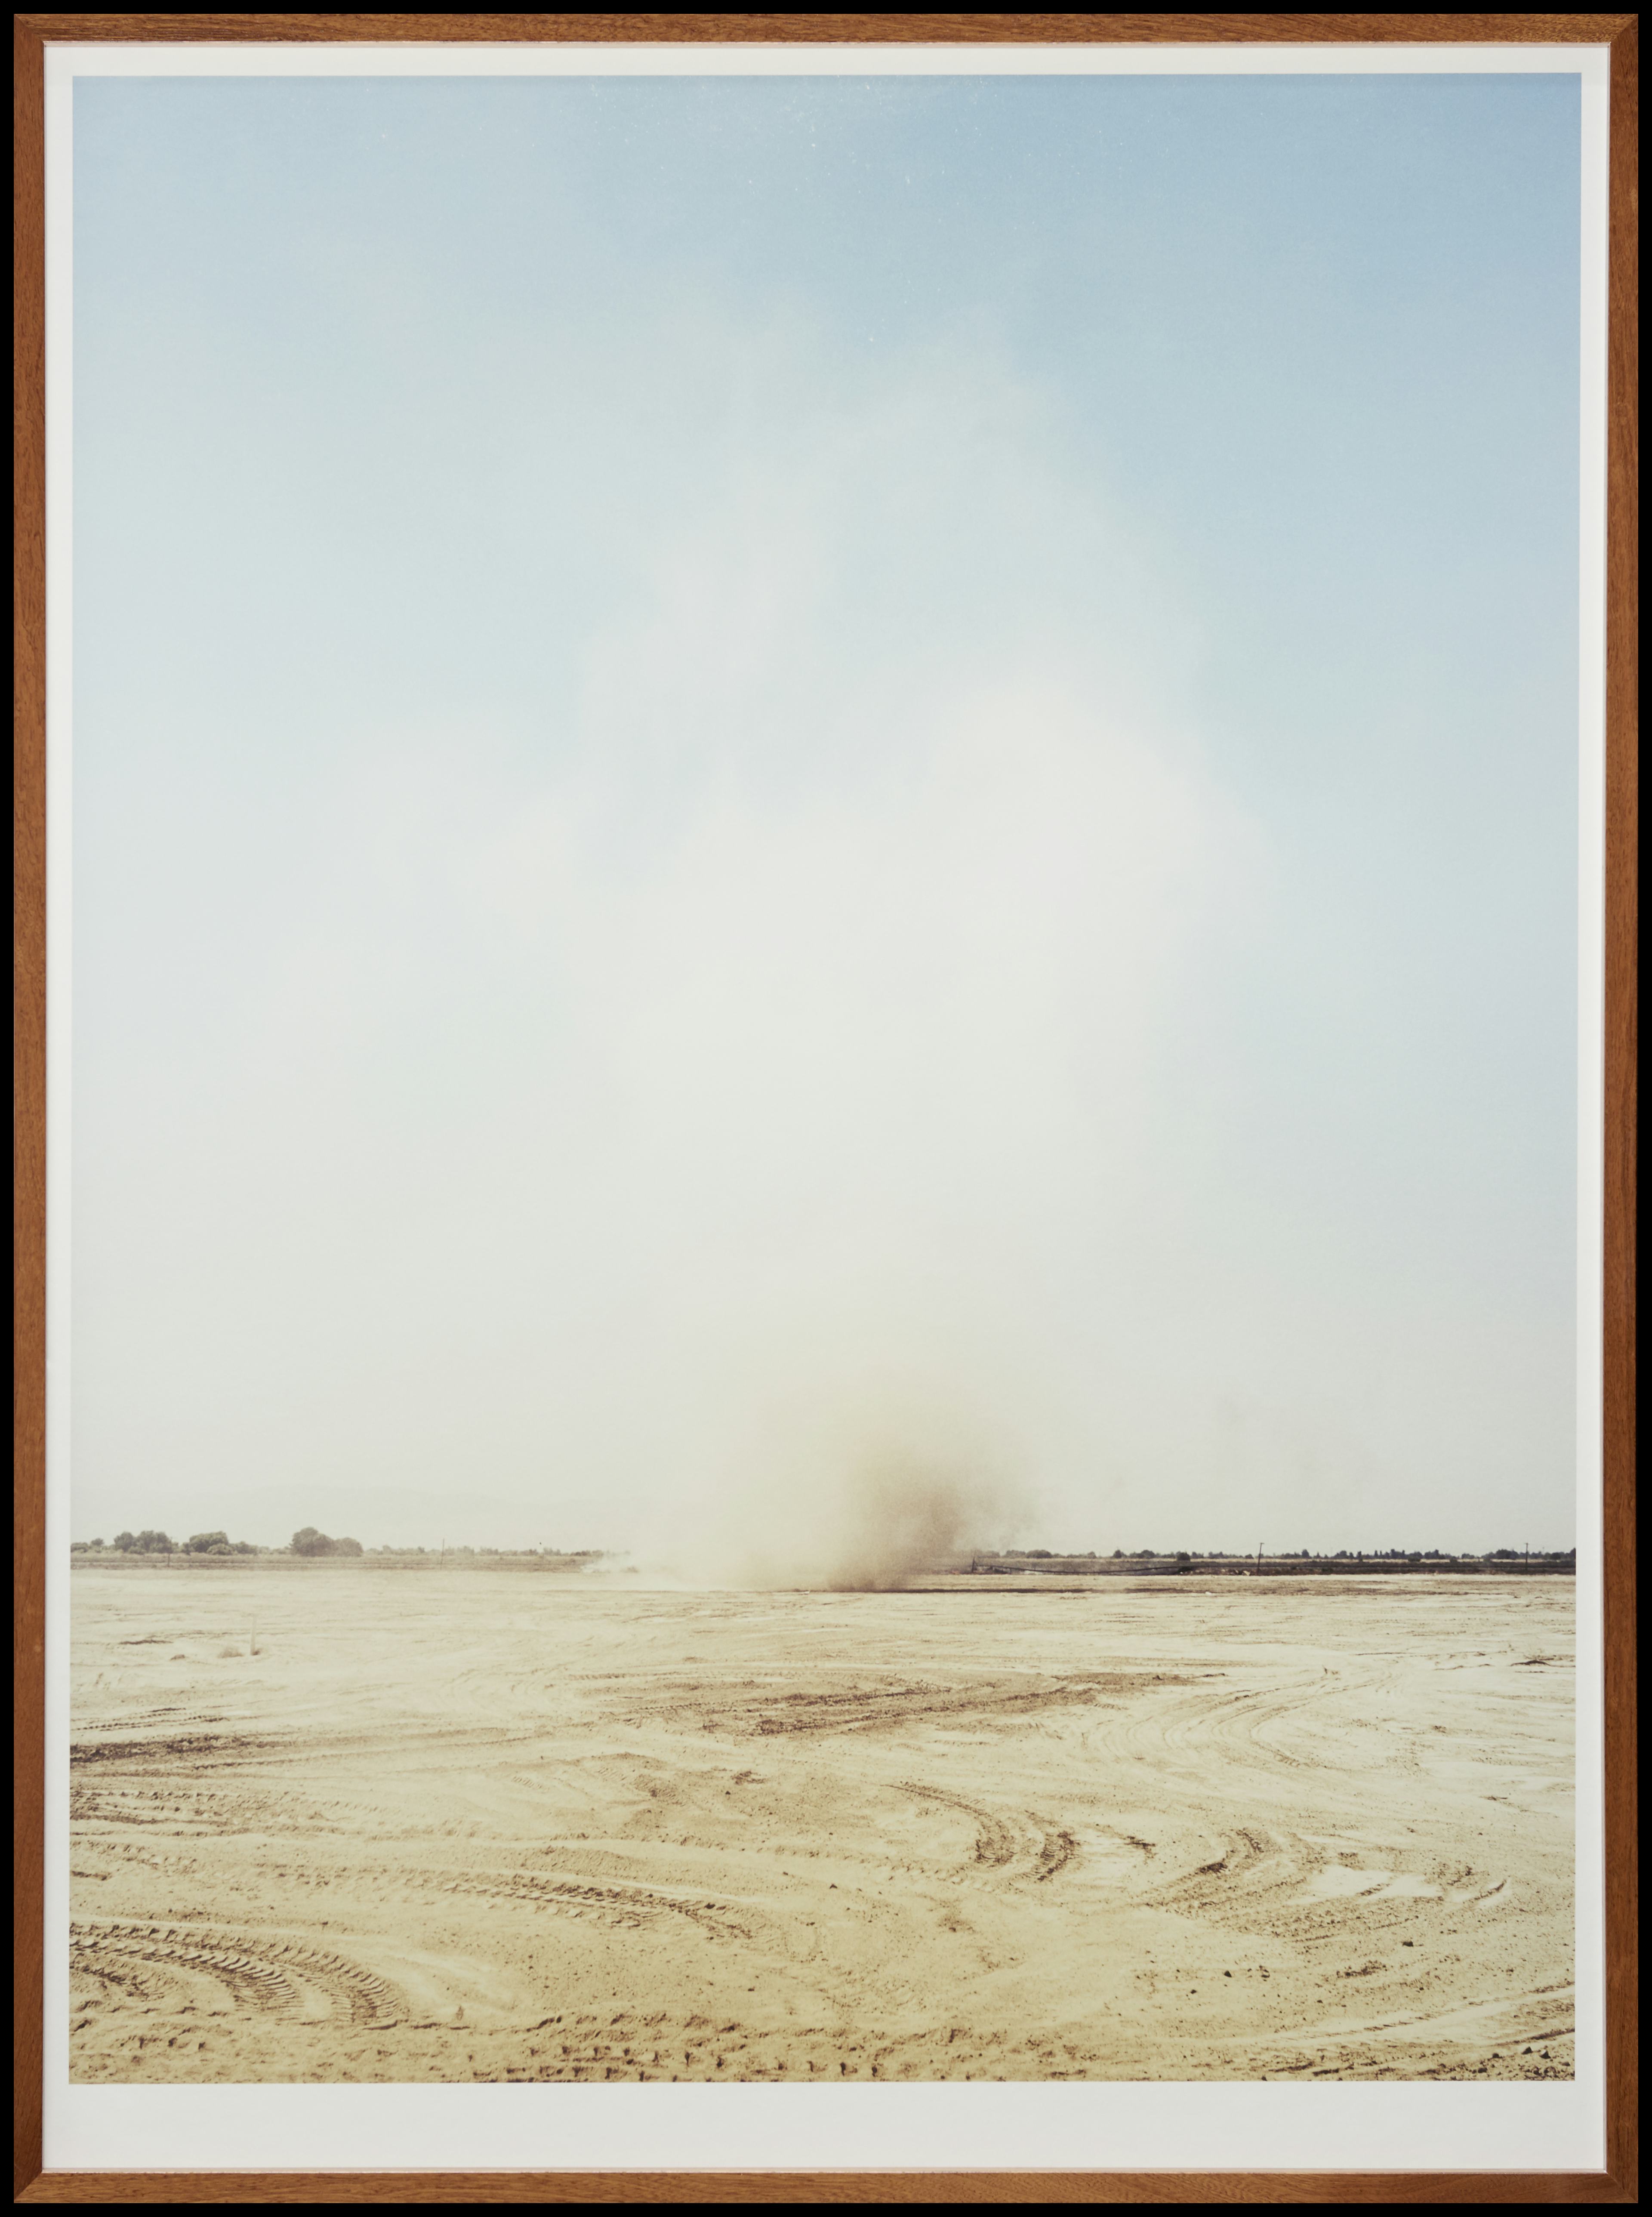 Image from the series Tranquillity, 2014 © Heikki Kaski, courtesy of the Foam Collection